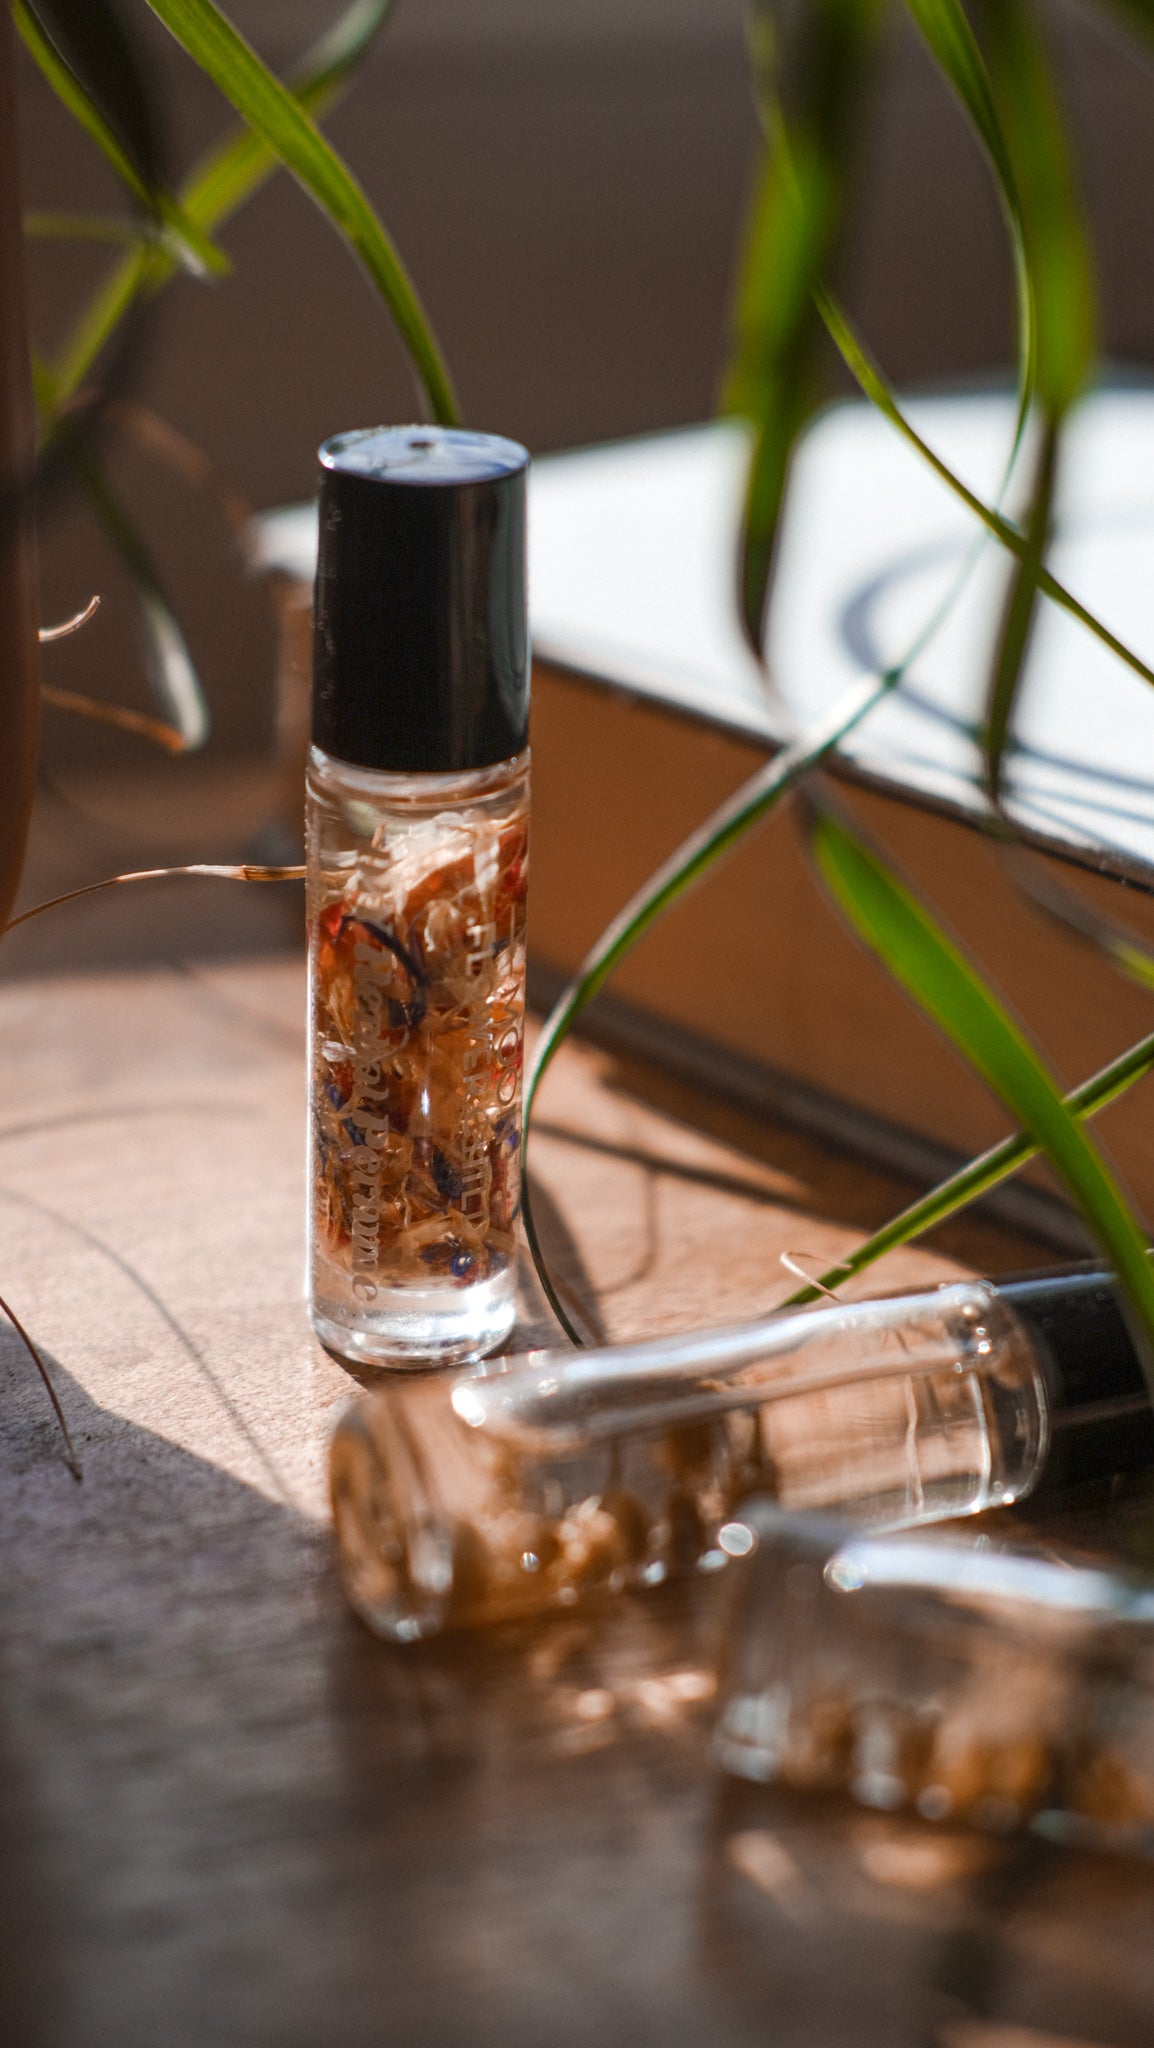 DIY Herbal Perfume ONLINE COURSE - The Scent of Self-Worth